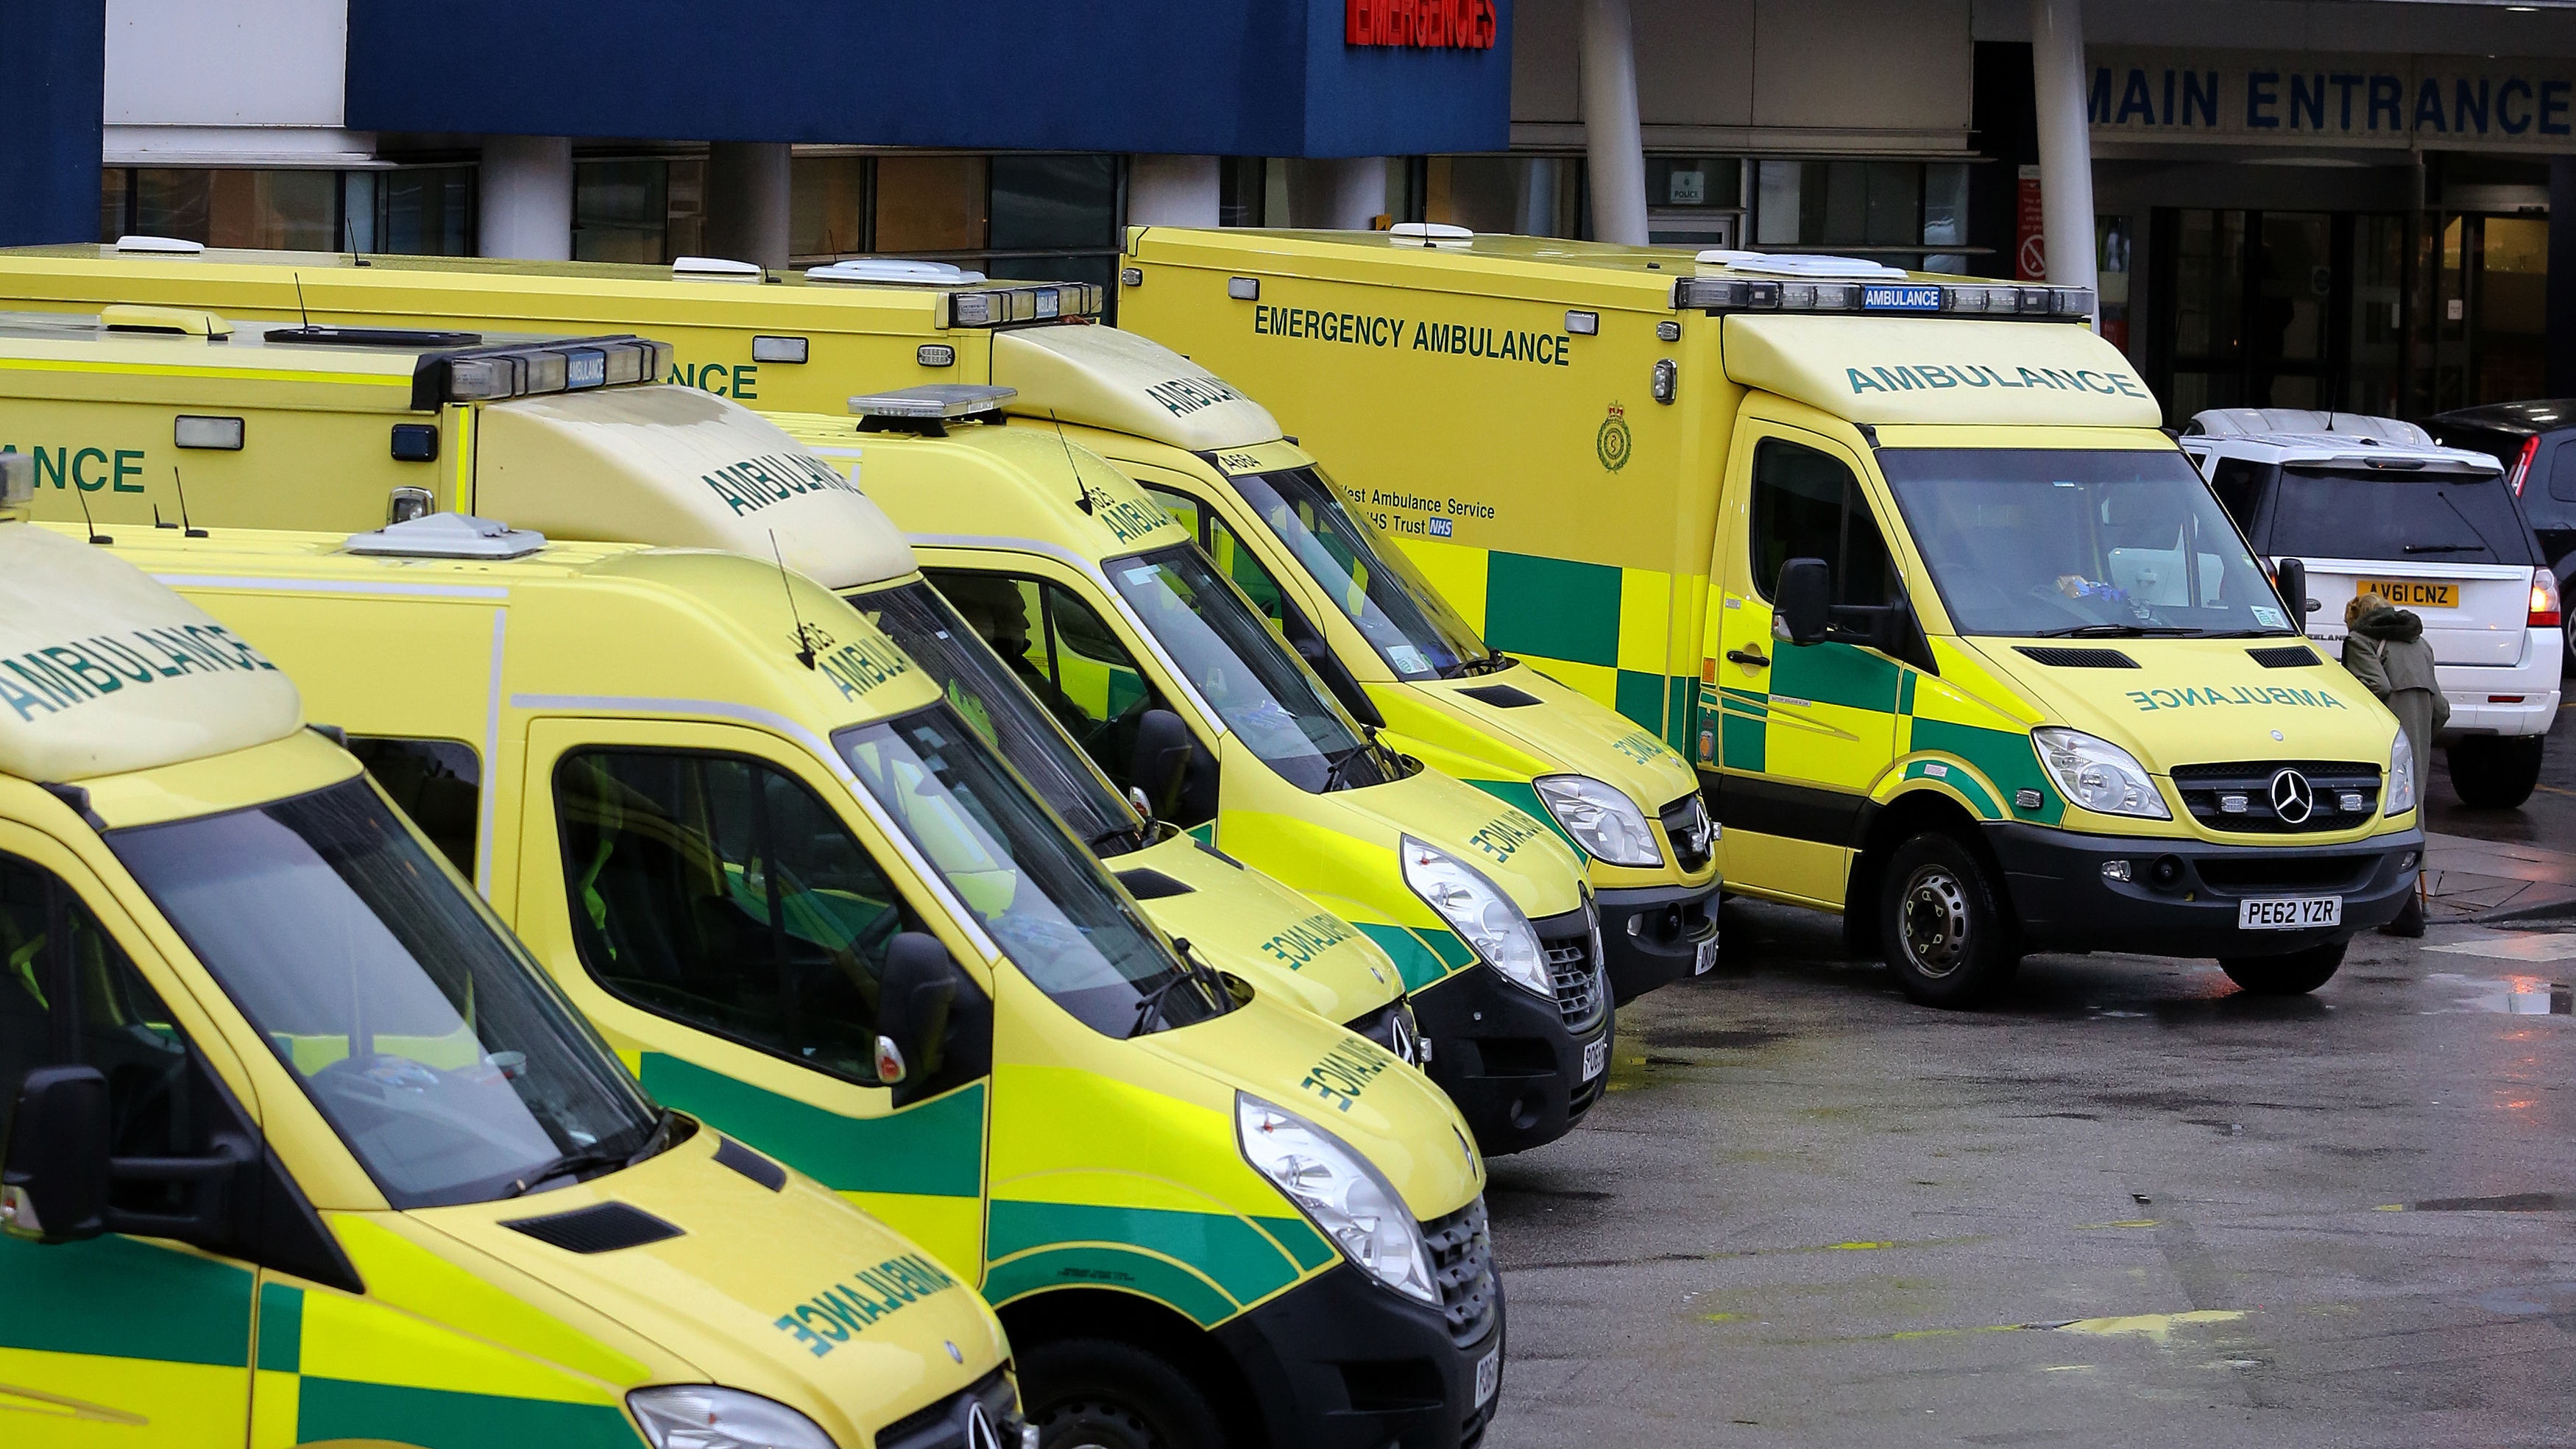 nhs-increases-spend-on-private-ambulances-and-taxis-to-more-than-92m-136438817114302601-190827001105.jpg